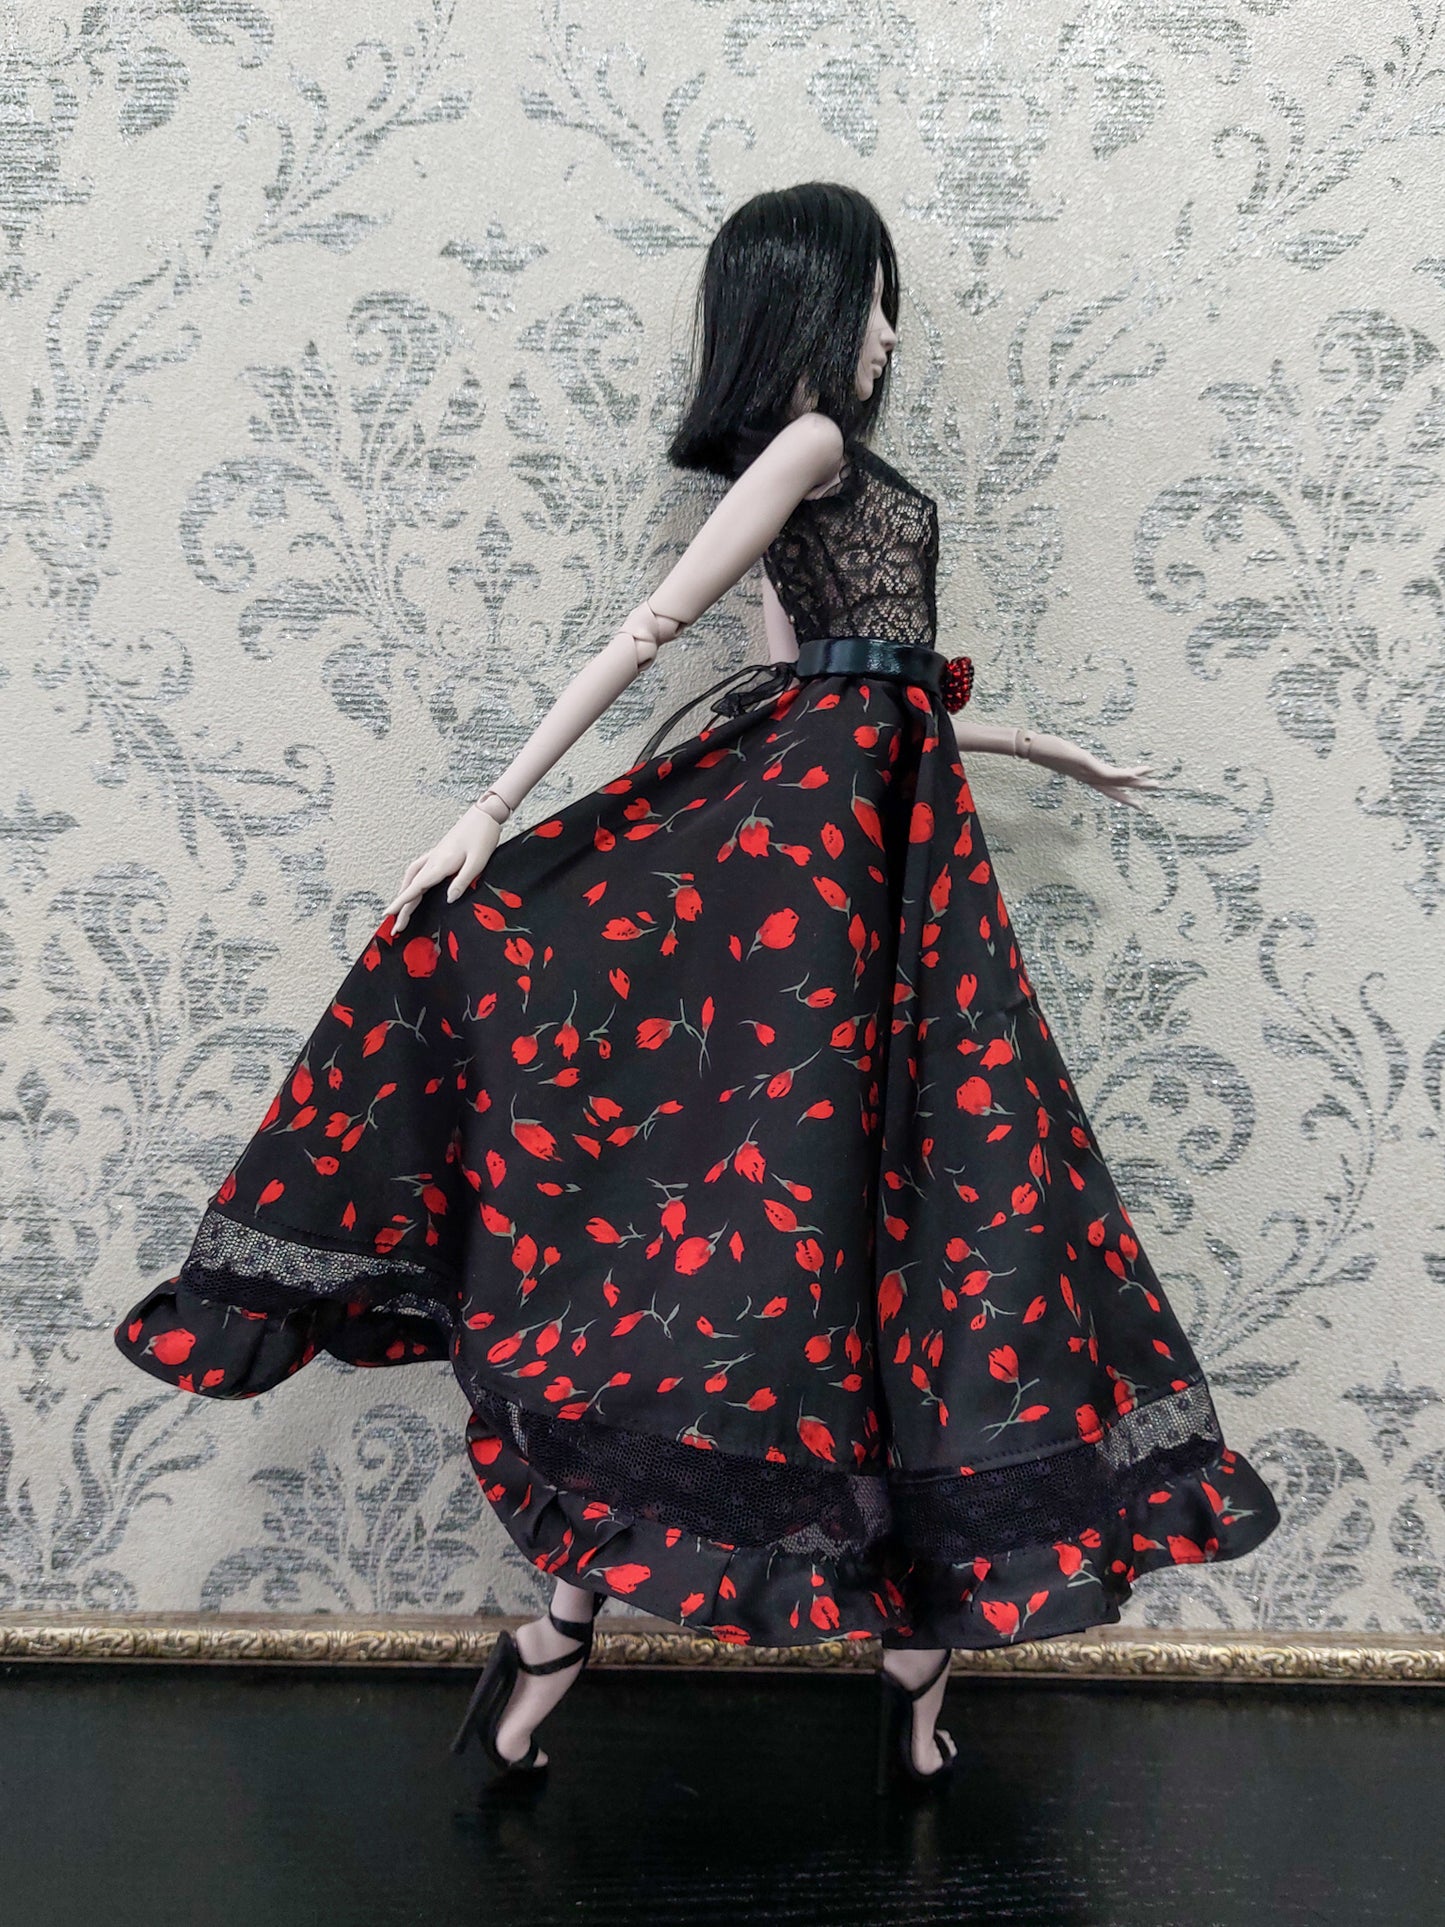 Doll dress, black with red flowers